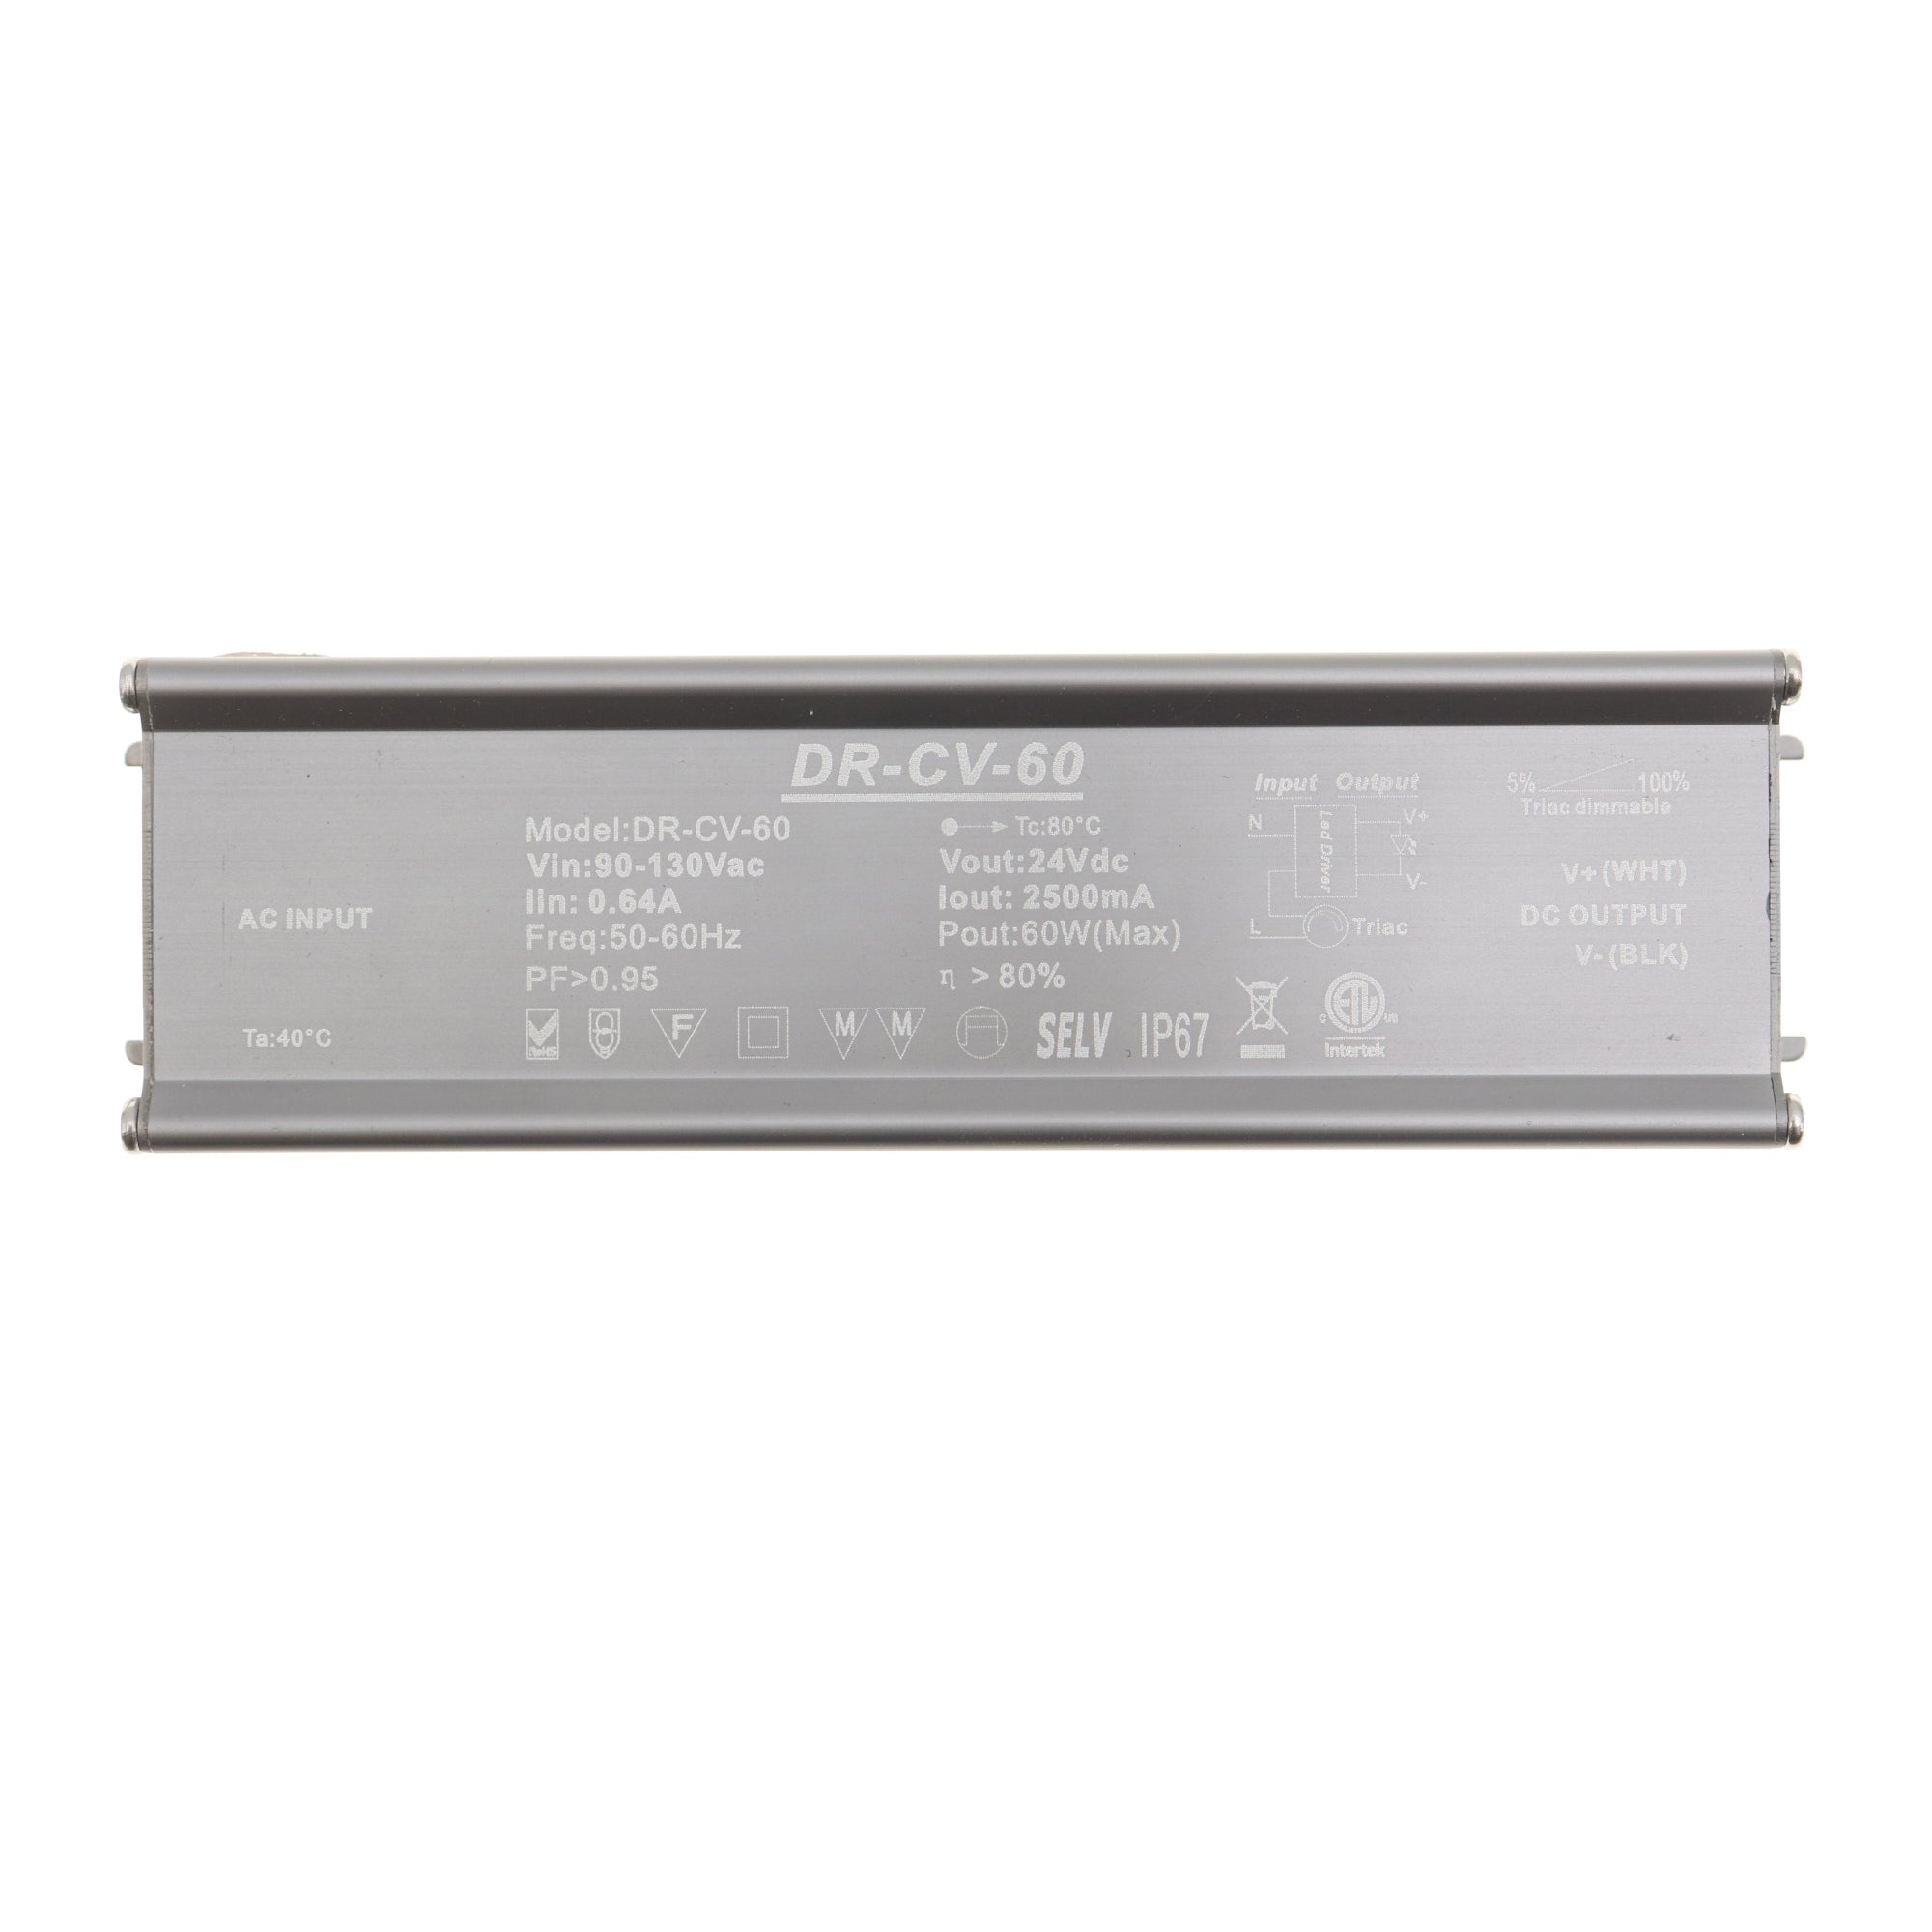 Generic, DR-CV-60 TRIAC DIMMABLE LED DRIVER, 24VDC, 2500MA, 60W, 120V:IN, IP67